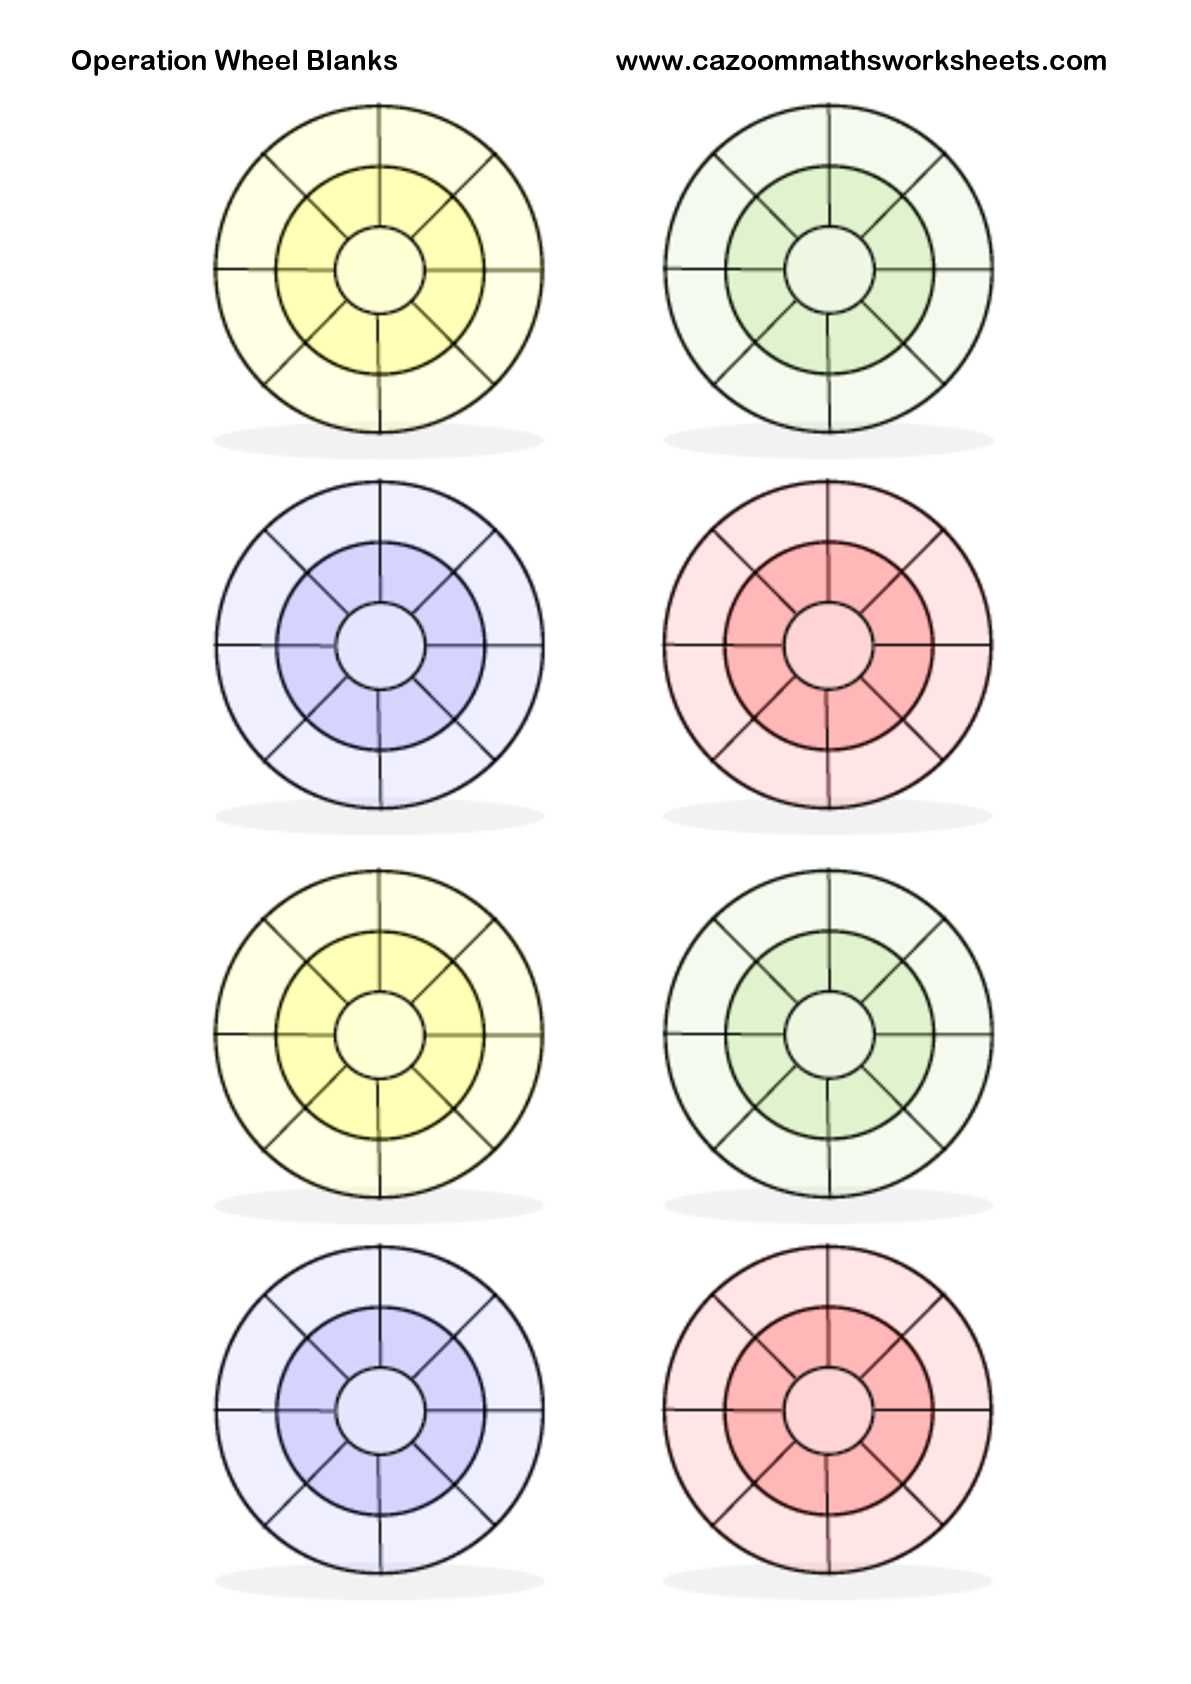 Operation Wheel Blanks For Addition Subtraction Or 